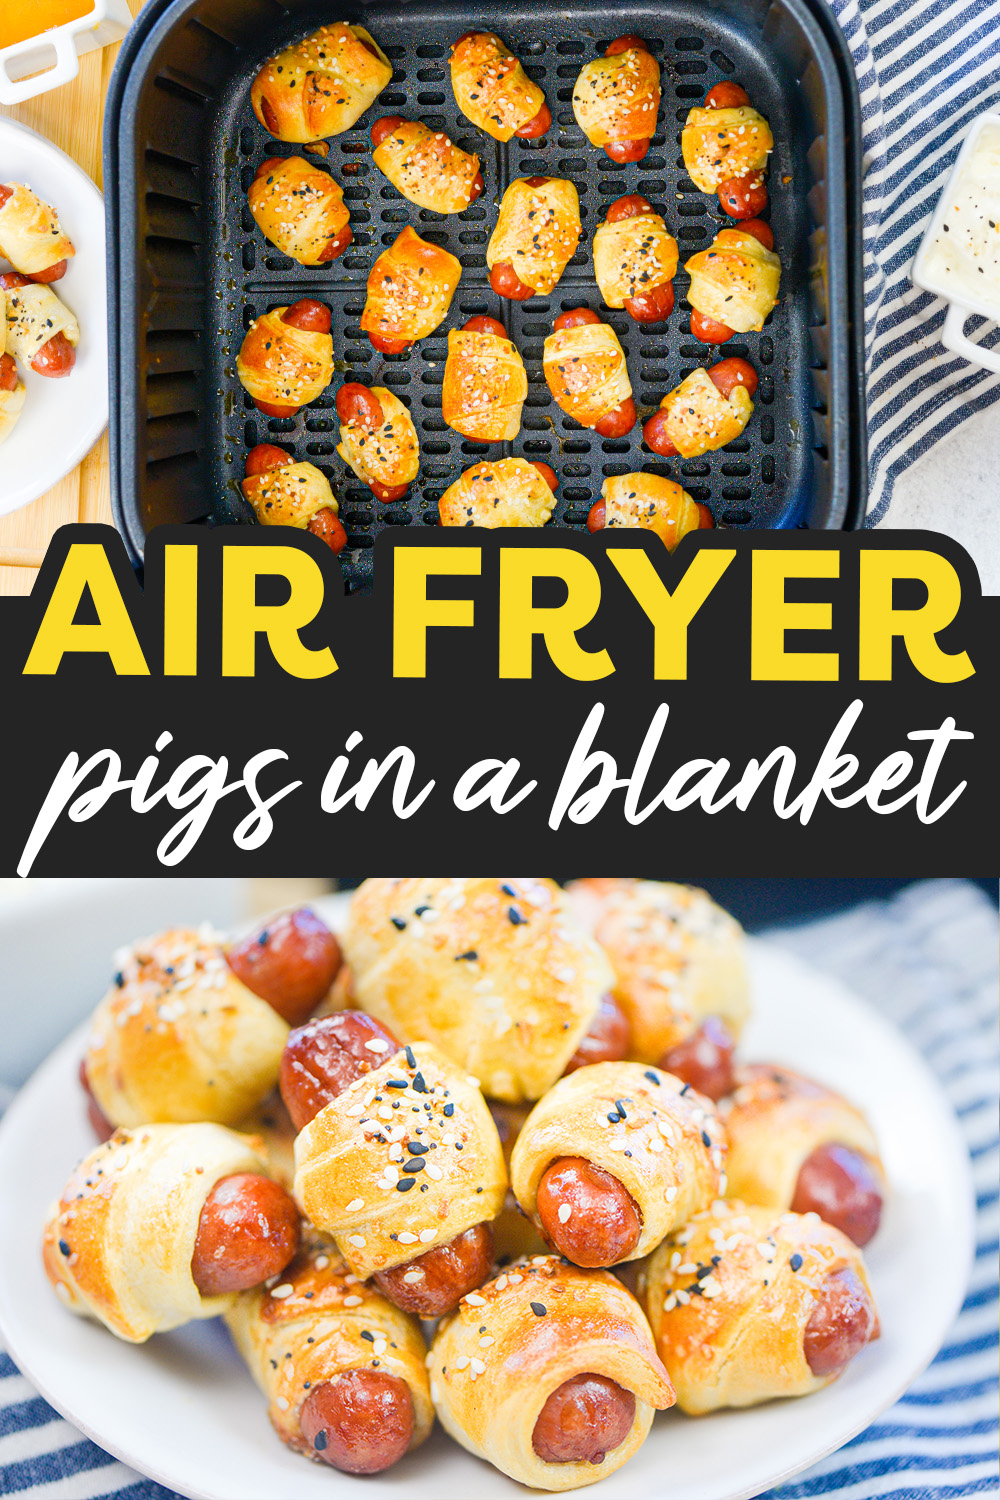 These mini pigs in a blanket are so easy to make in an air fryer!  We give them a little seasoning for a perfect appetizer!